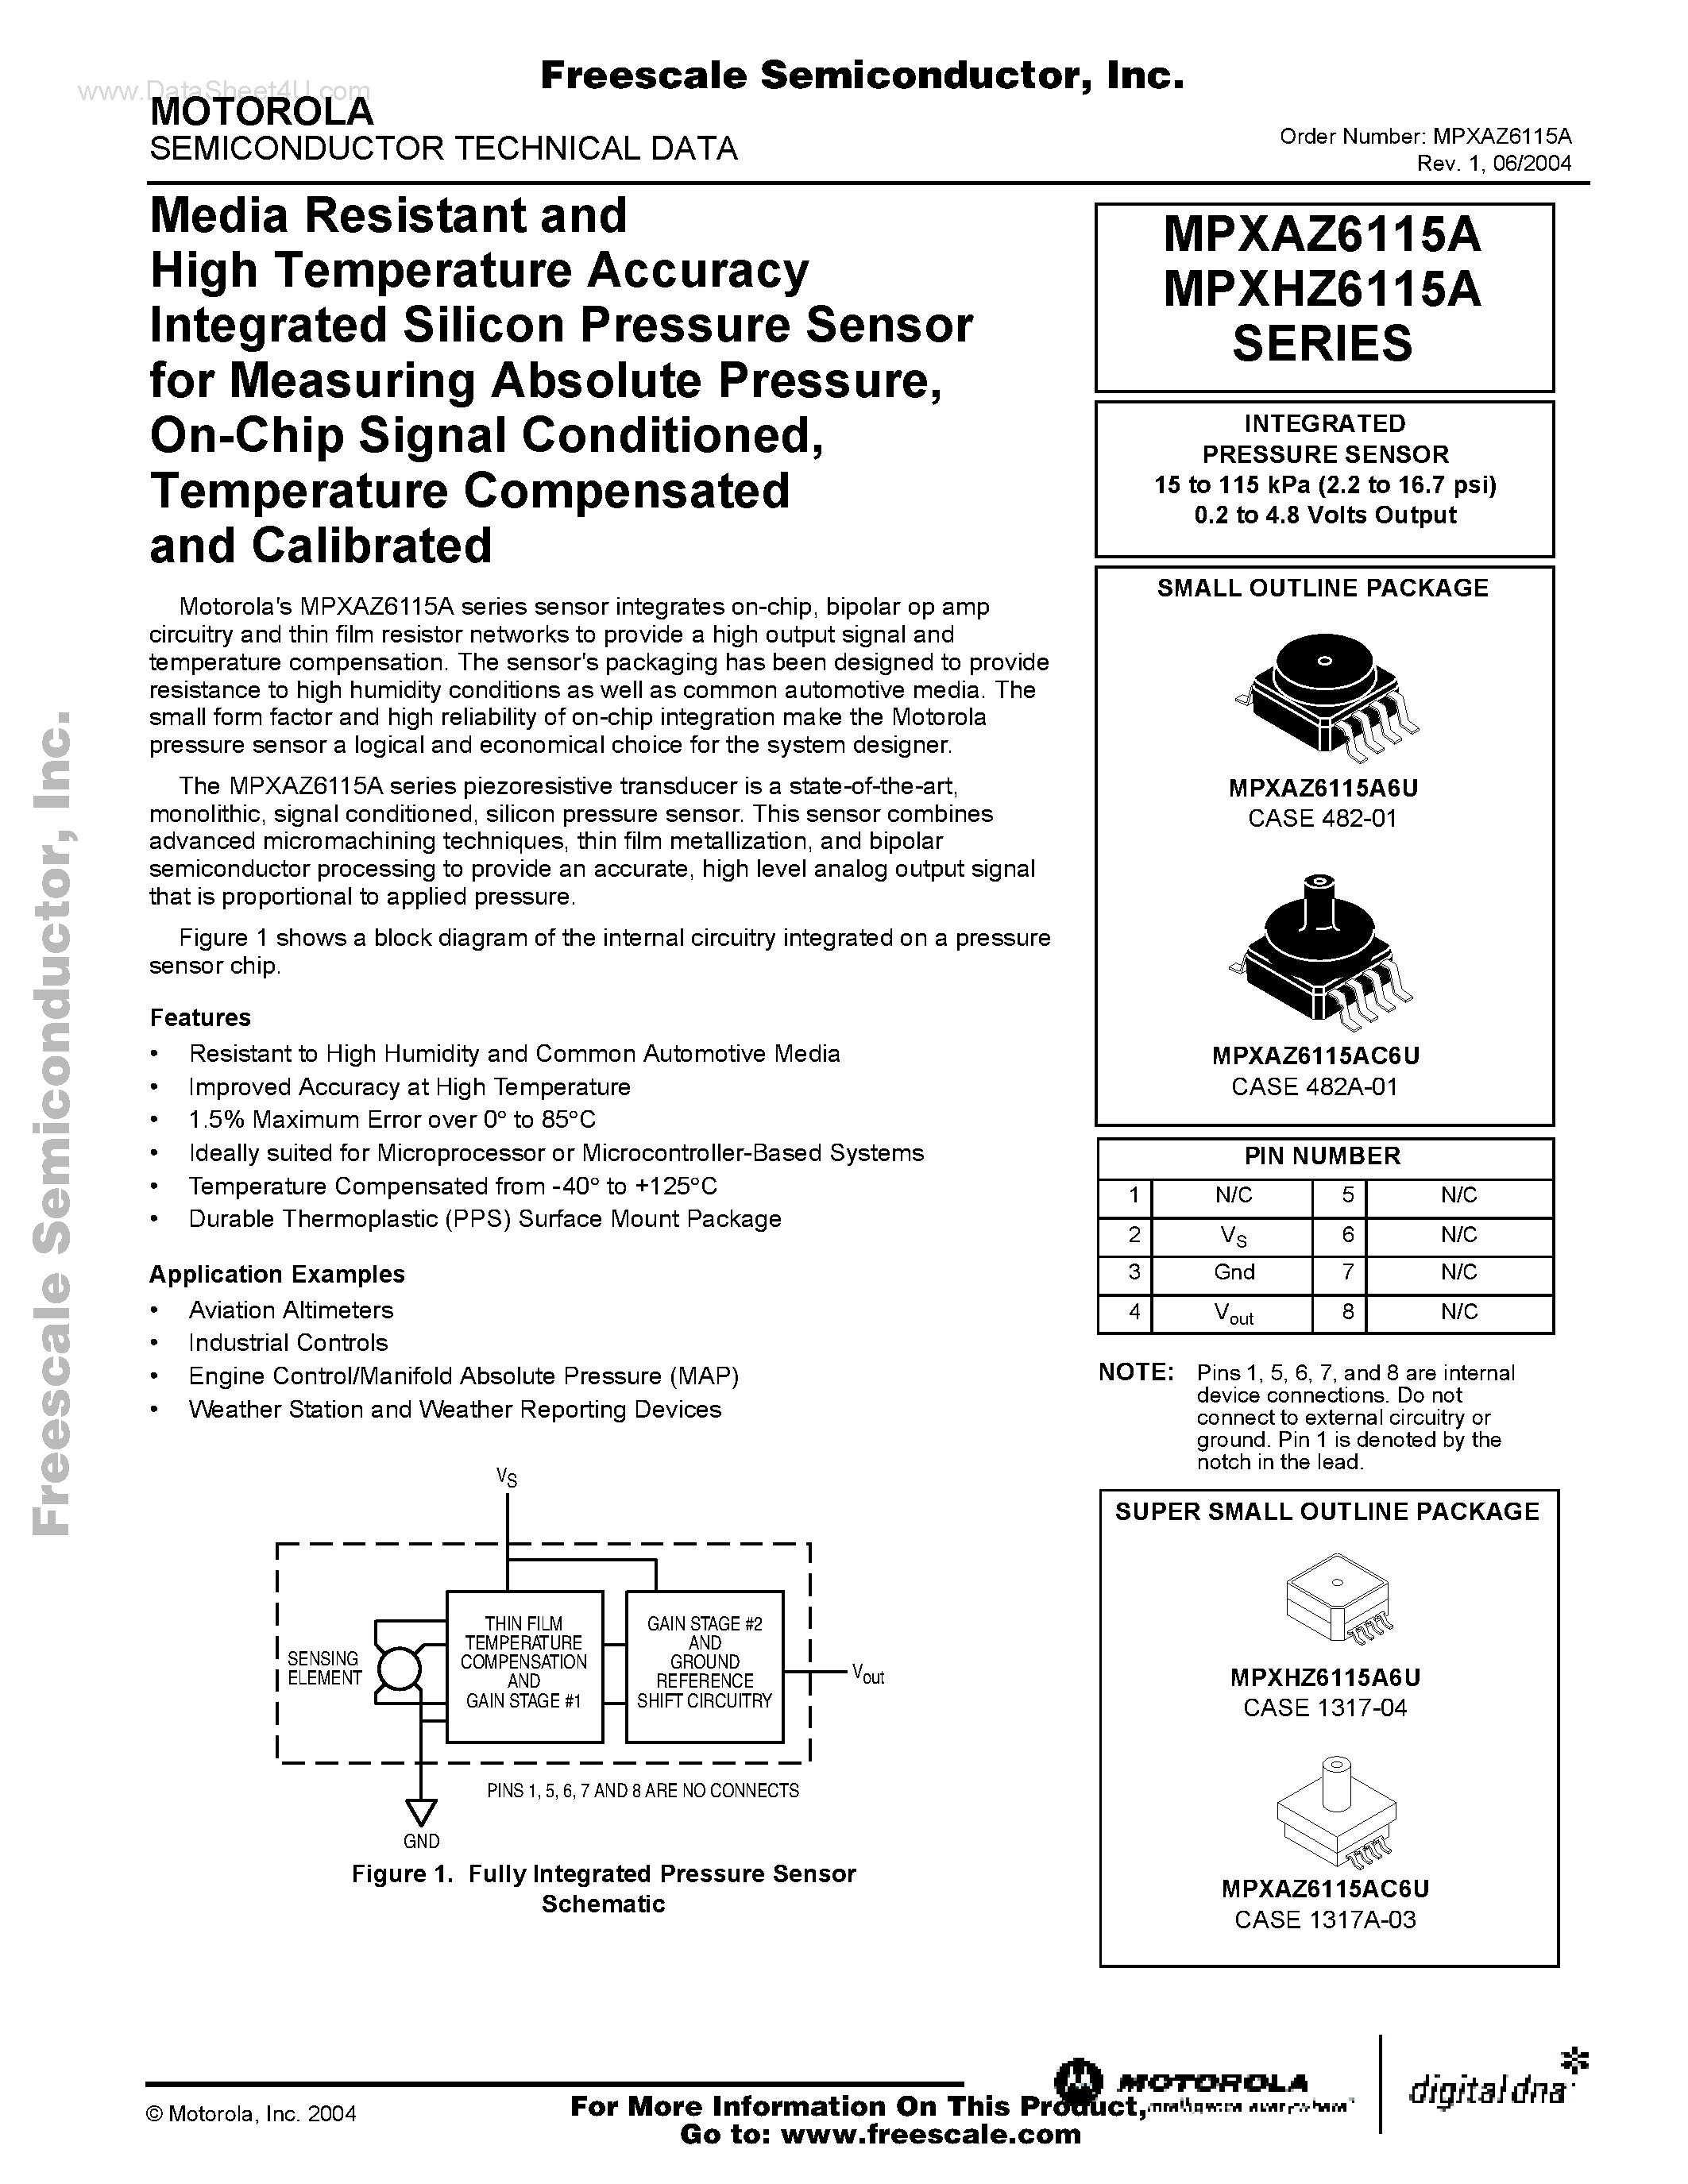 Datasheet MPXAZ6115A - Media Resistant and High Temperature Accuracy Integrated Silicon Pressure Sensor page 1